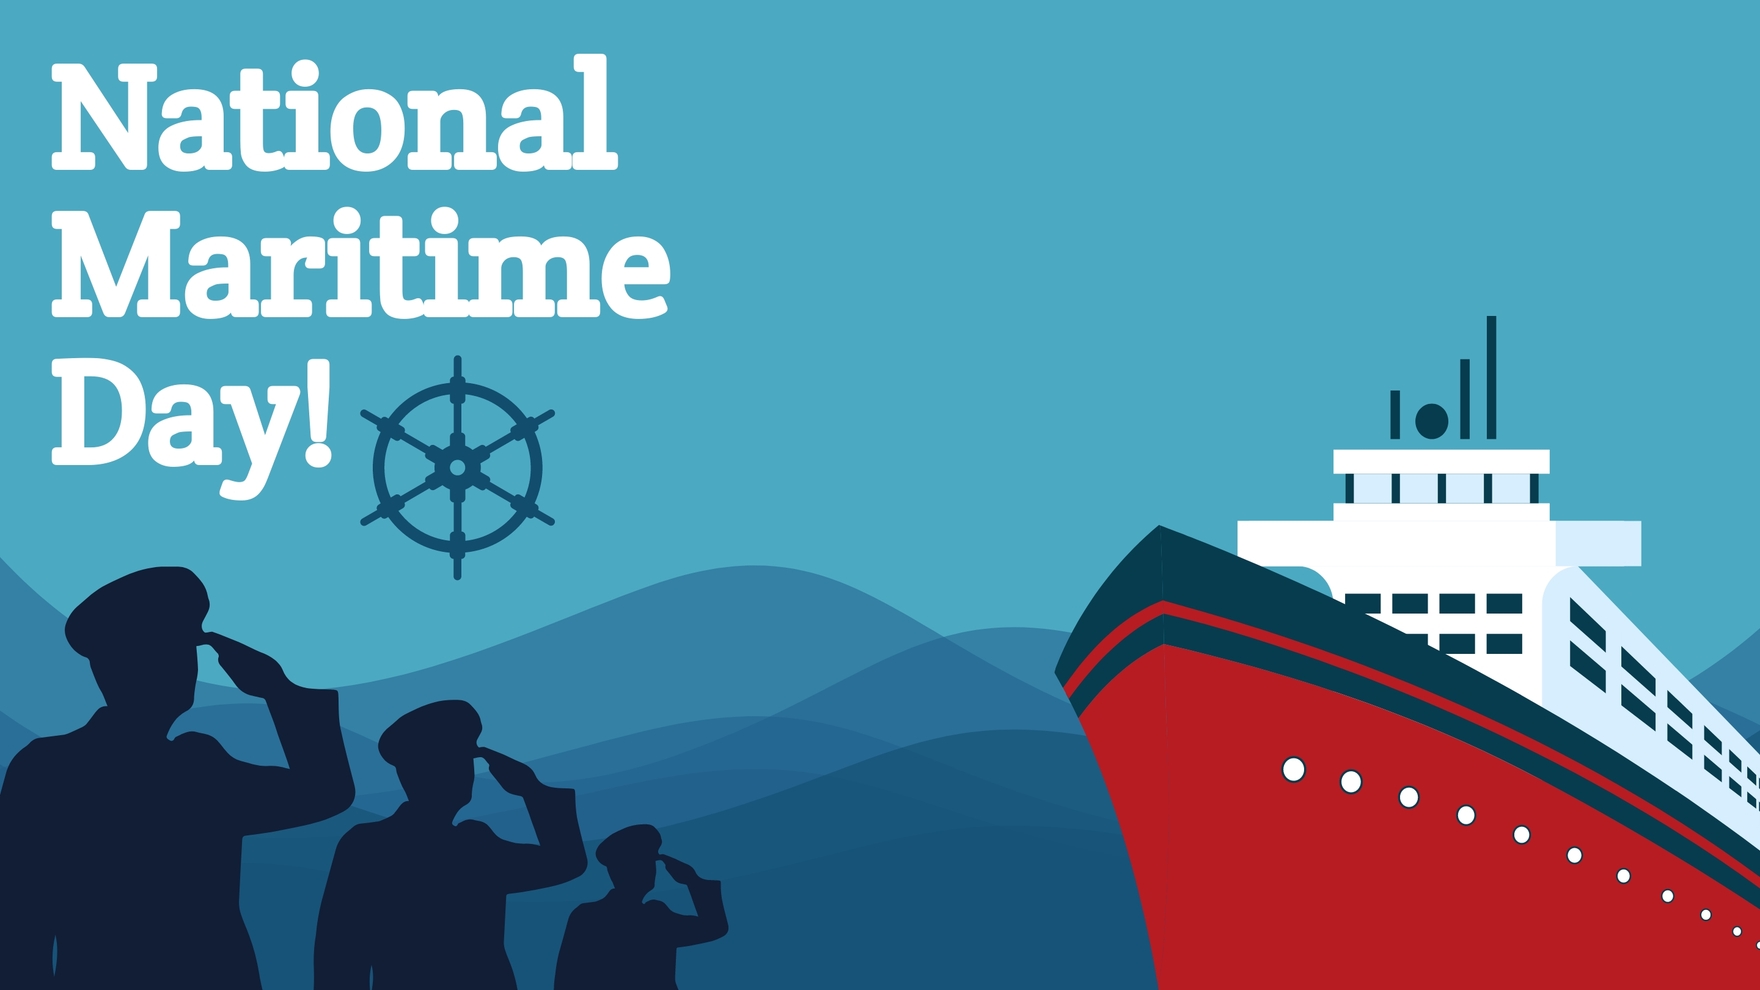 Free High Resolution National Maritime Day Background in PDF, Illustrator, PSD, EPS, SVG, JPG, PNG